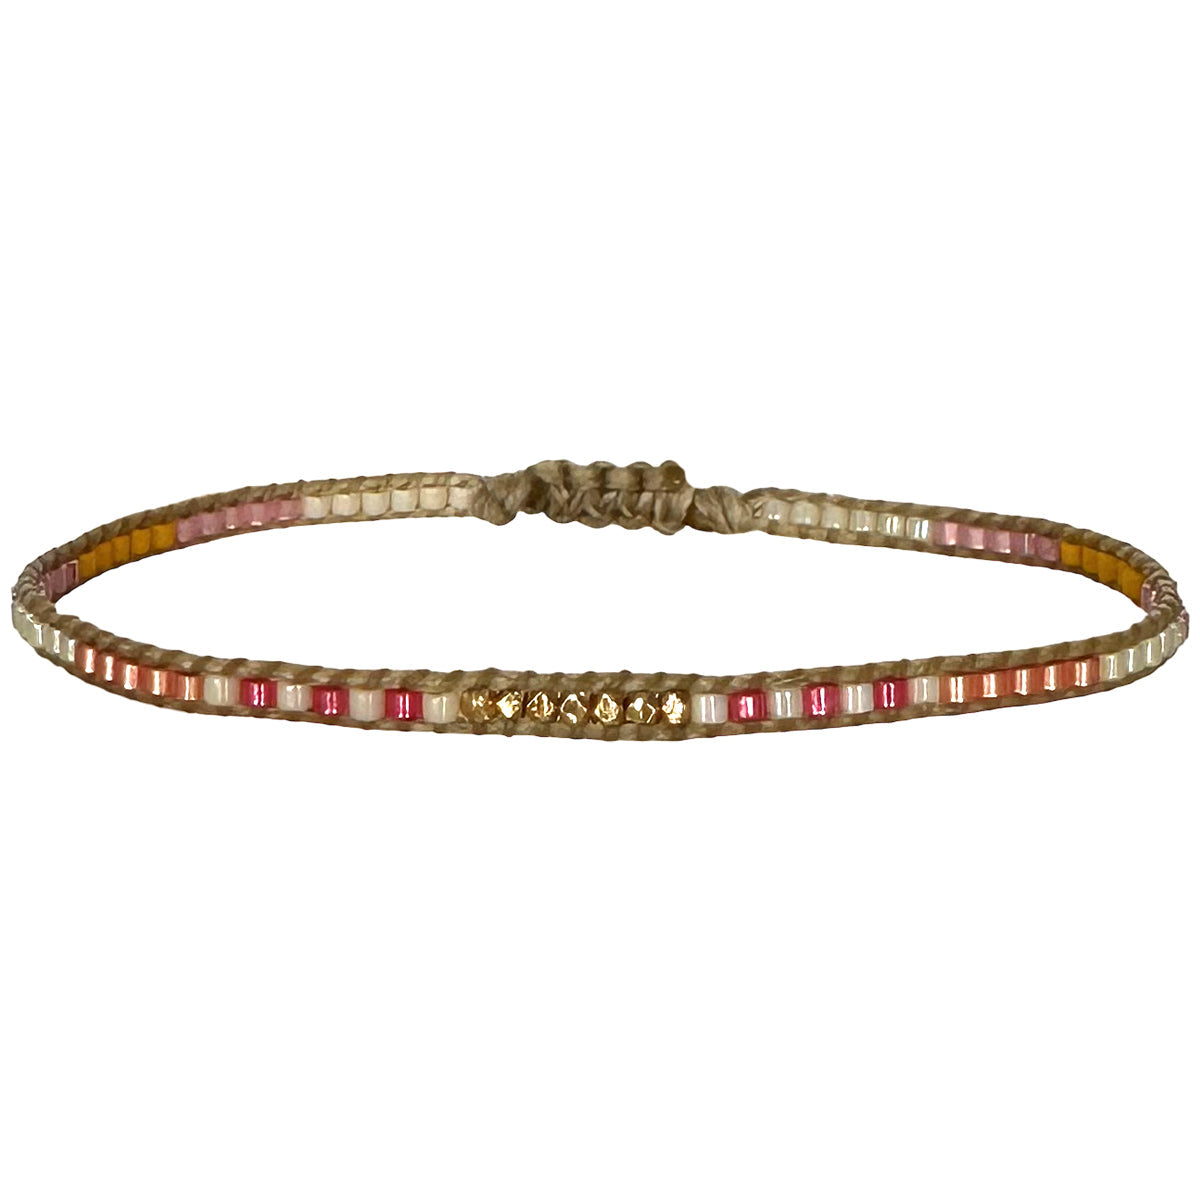 HANDMADE BEADED BRACELET IN PINK TONES WITH GOLD DETAIL